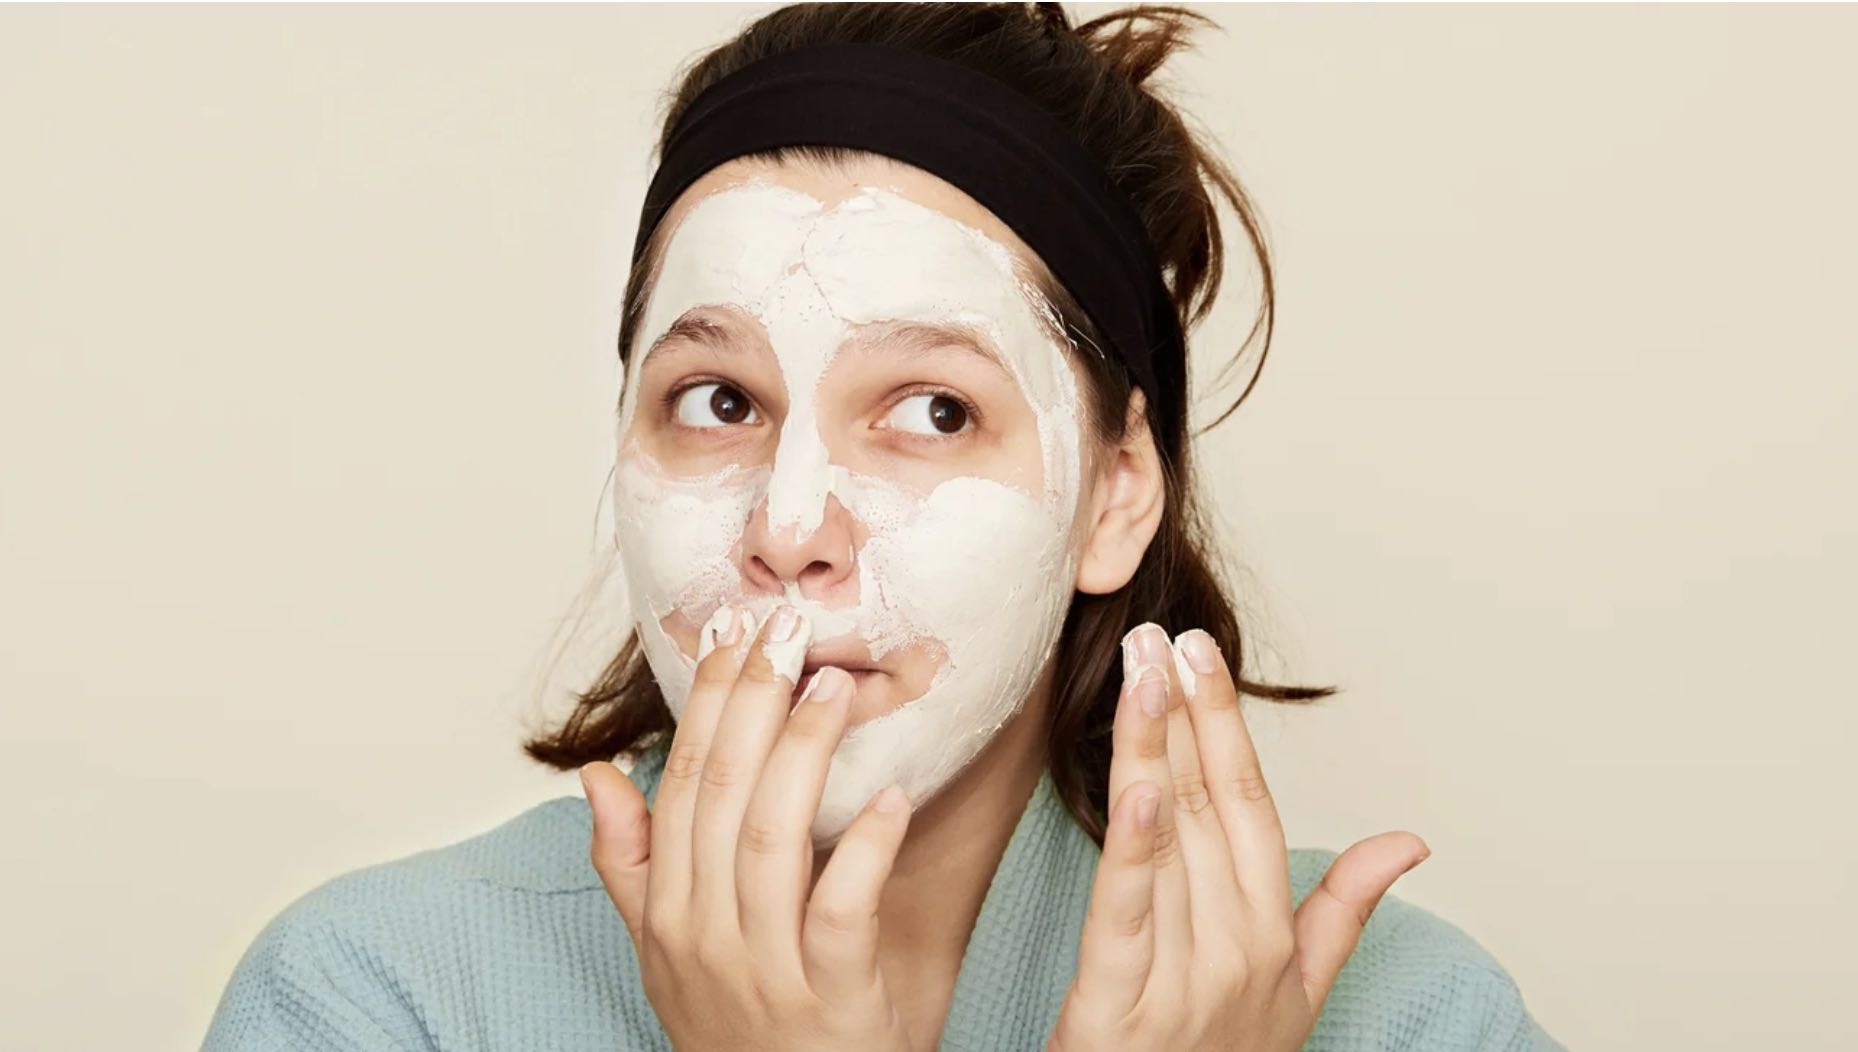 Why should you exfoliate?